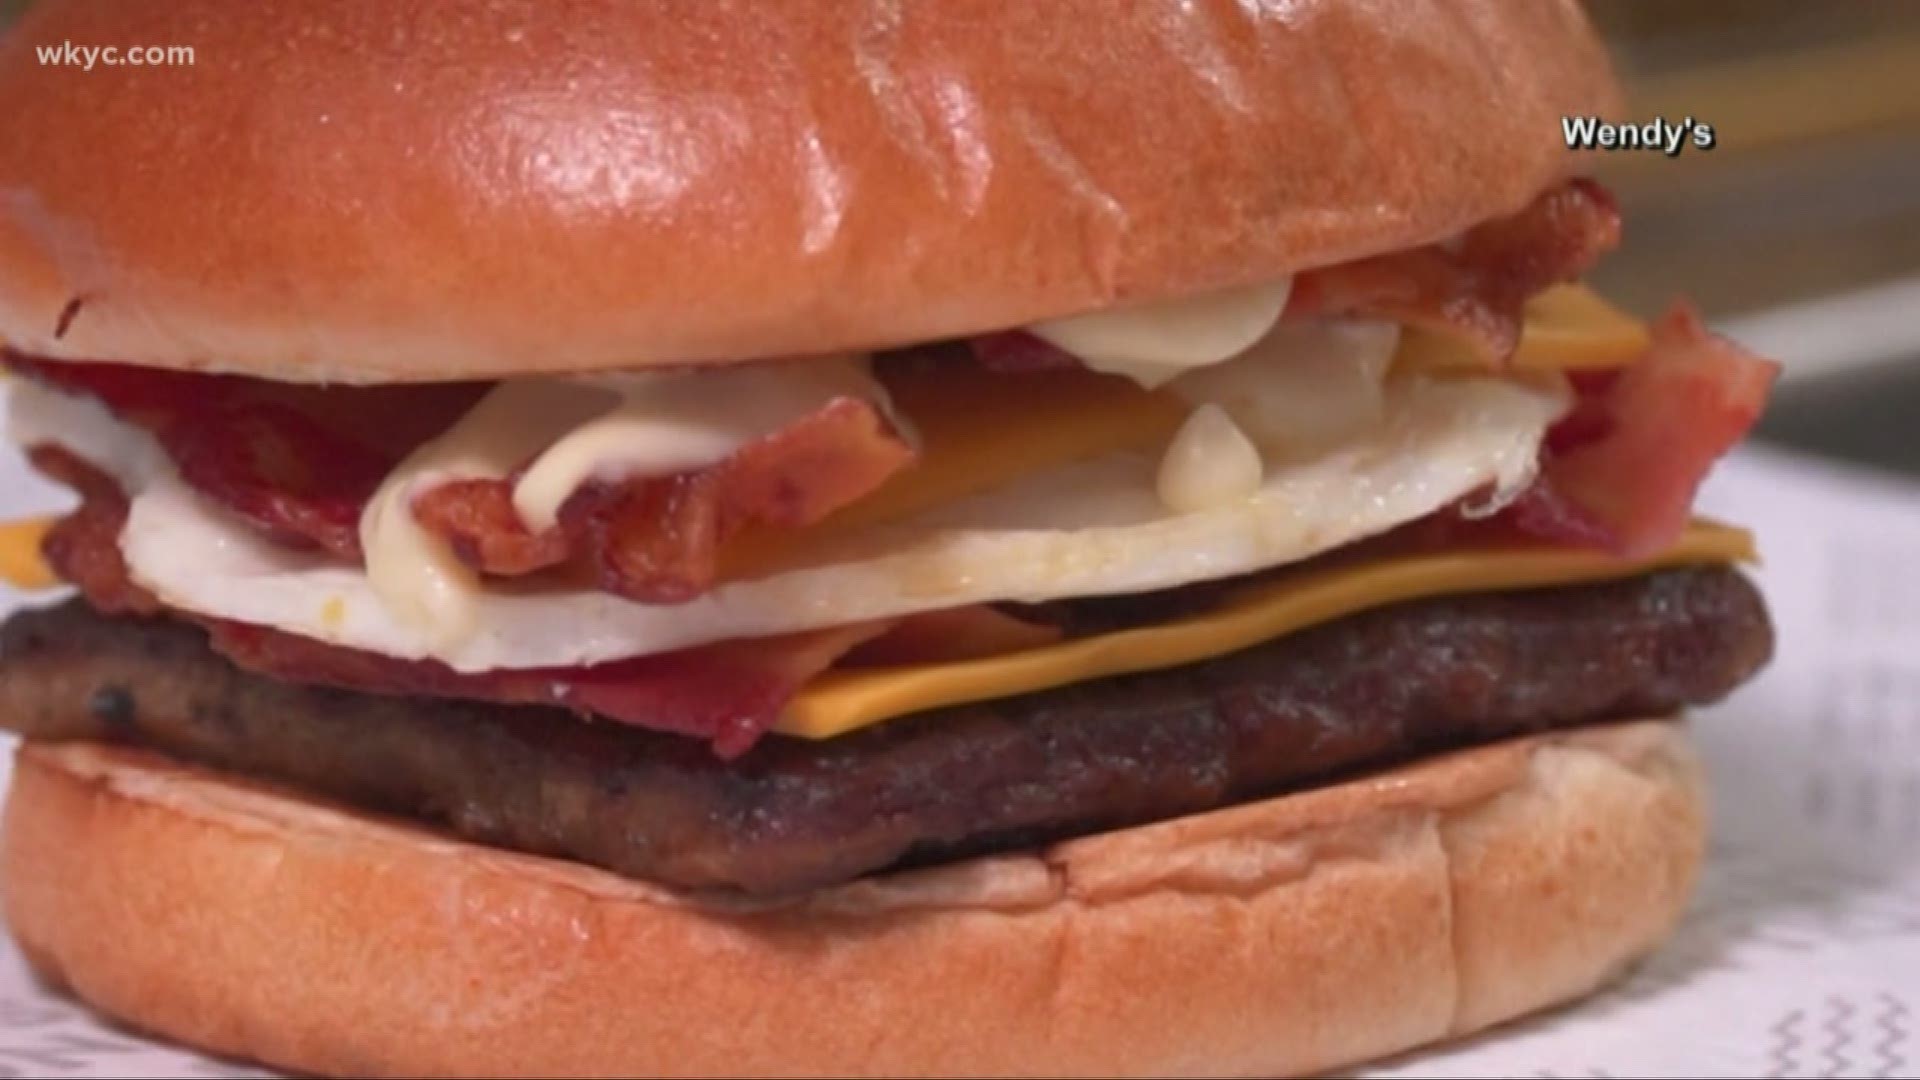 March 2, 2020: Wendy's is jumping into the breakfast business by serving up a new morning menu nationwide. The menu's signature items include the Breakfast Baconator